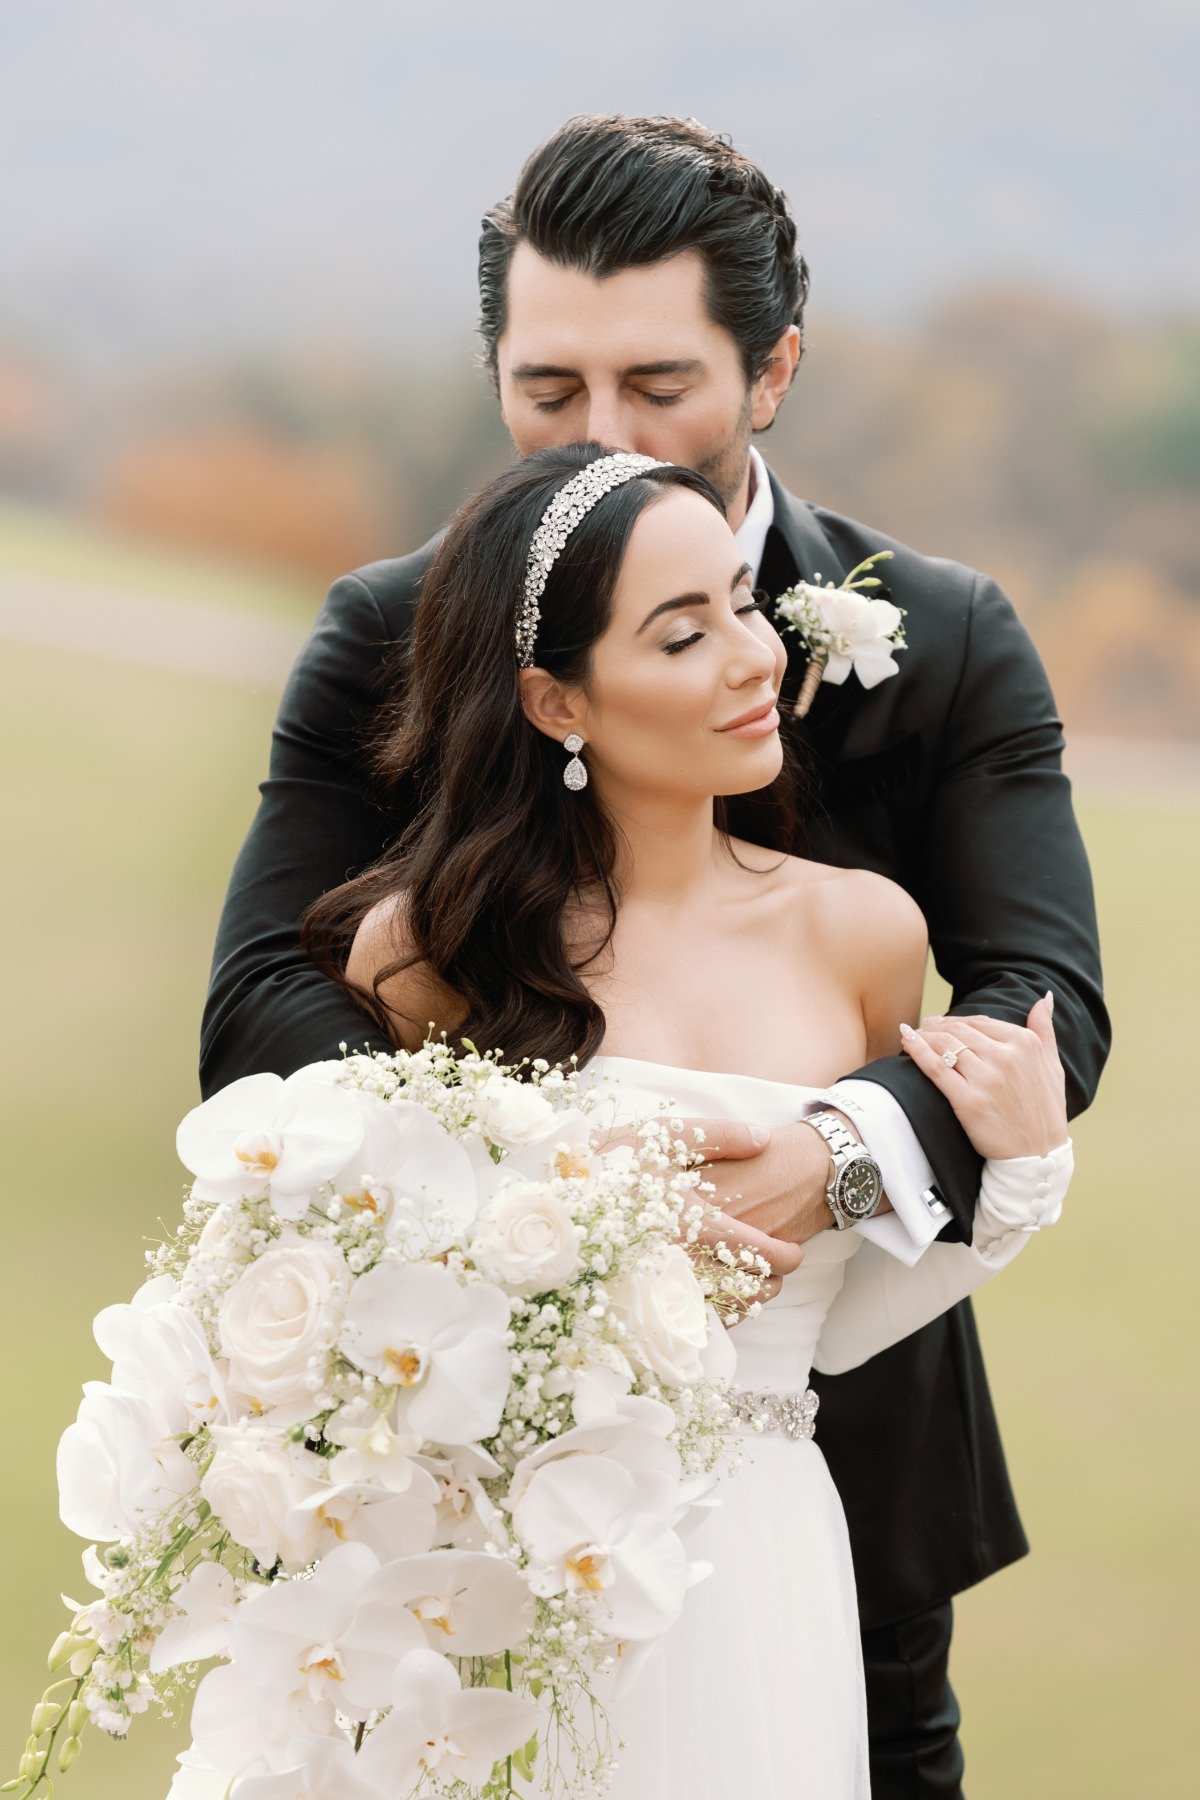 Romantic and tender wedding photography in North Carolina 